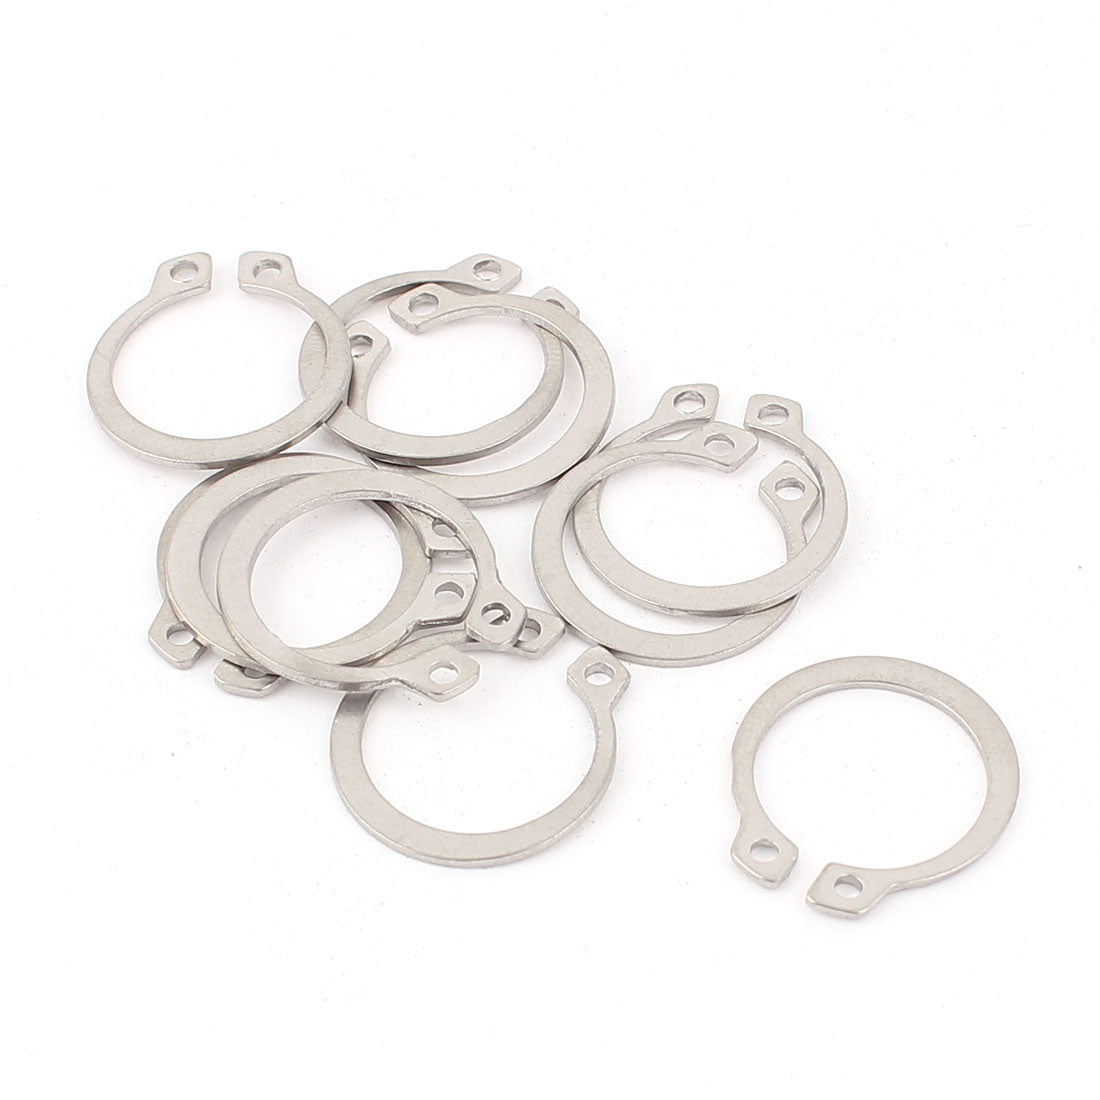 uxcell Uxcell 10pcs 304 Stainless Steel External Circlip Retaining Shaft Snap Rings 17mm